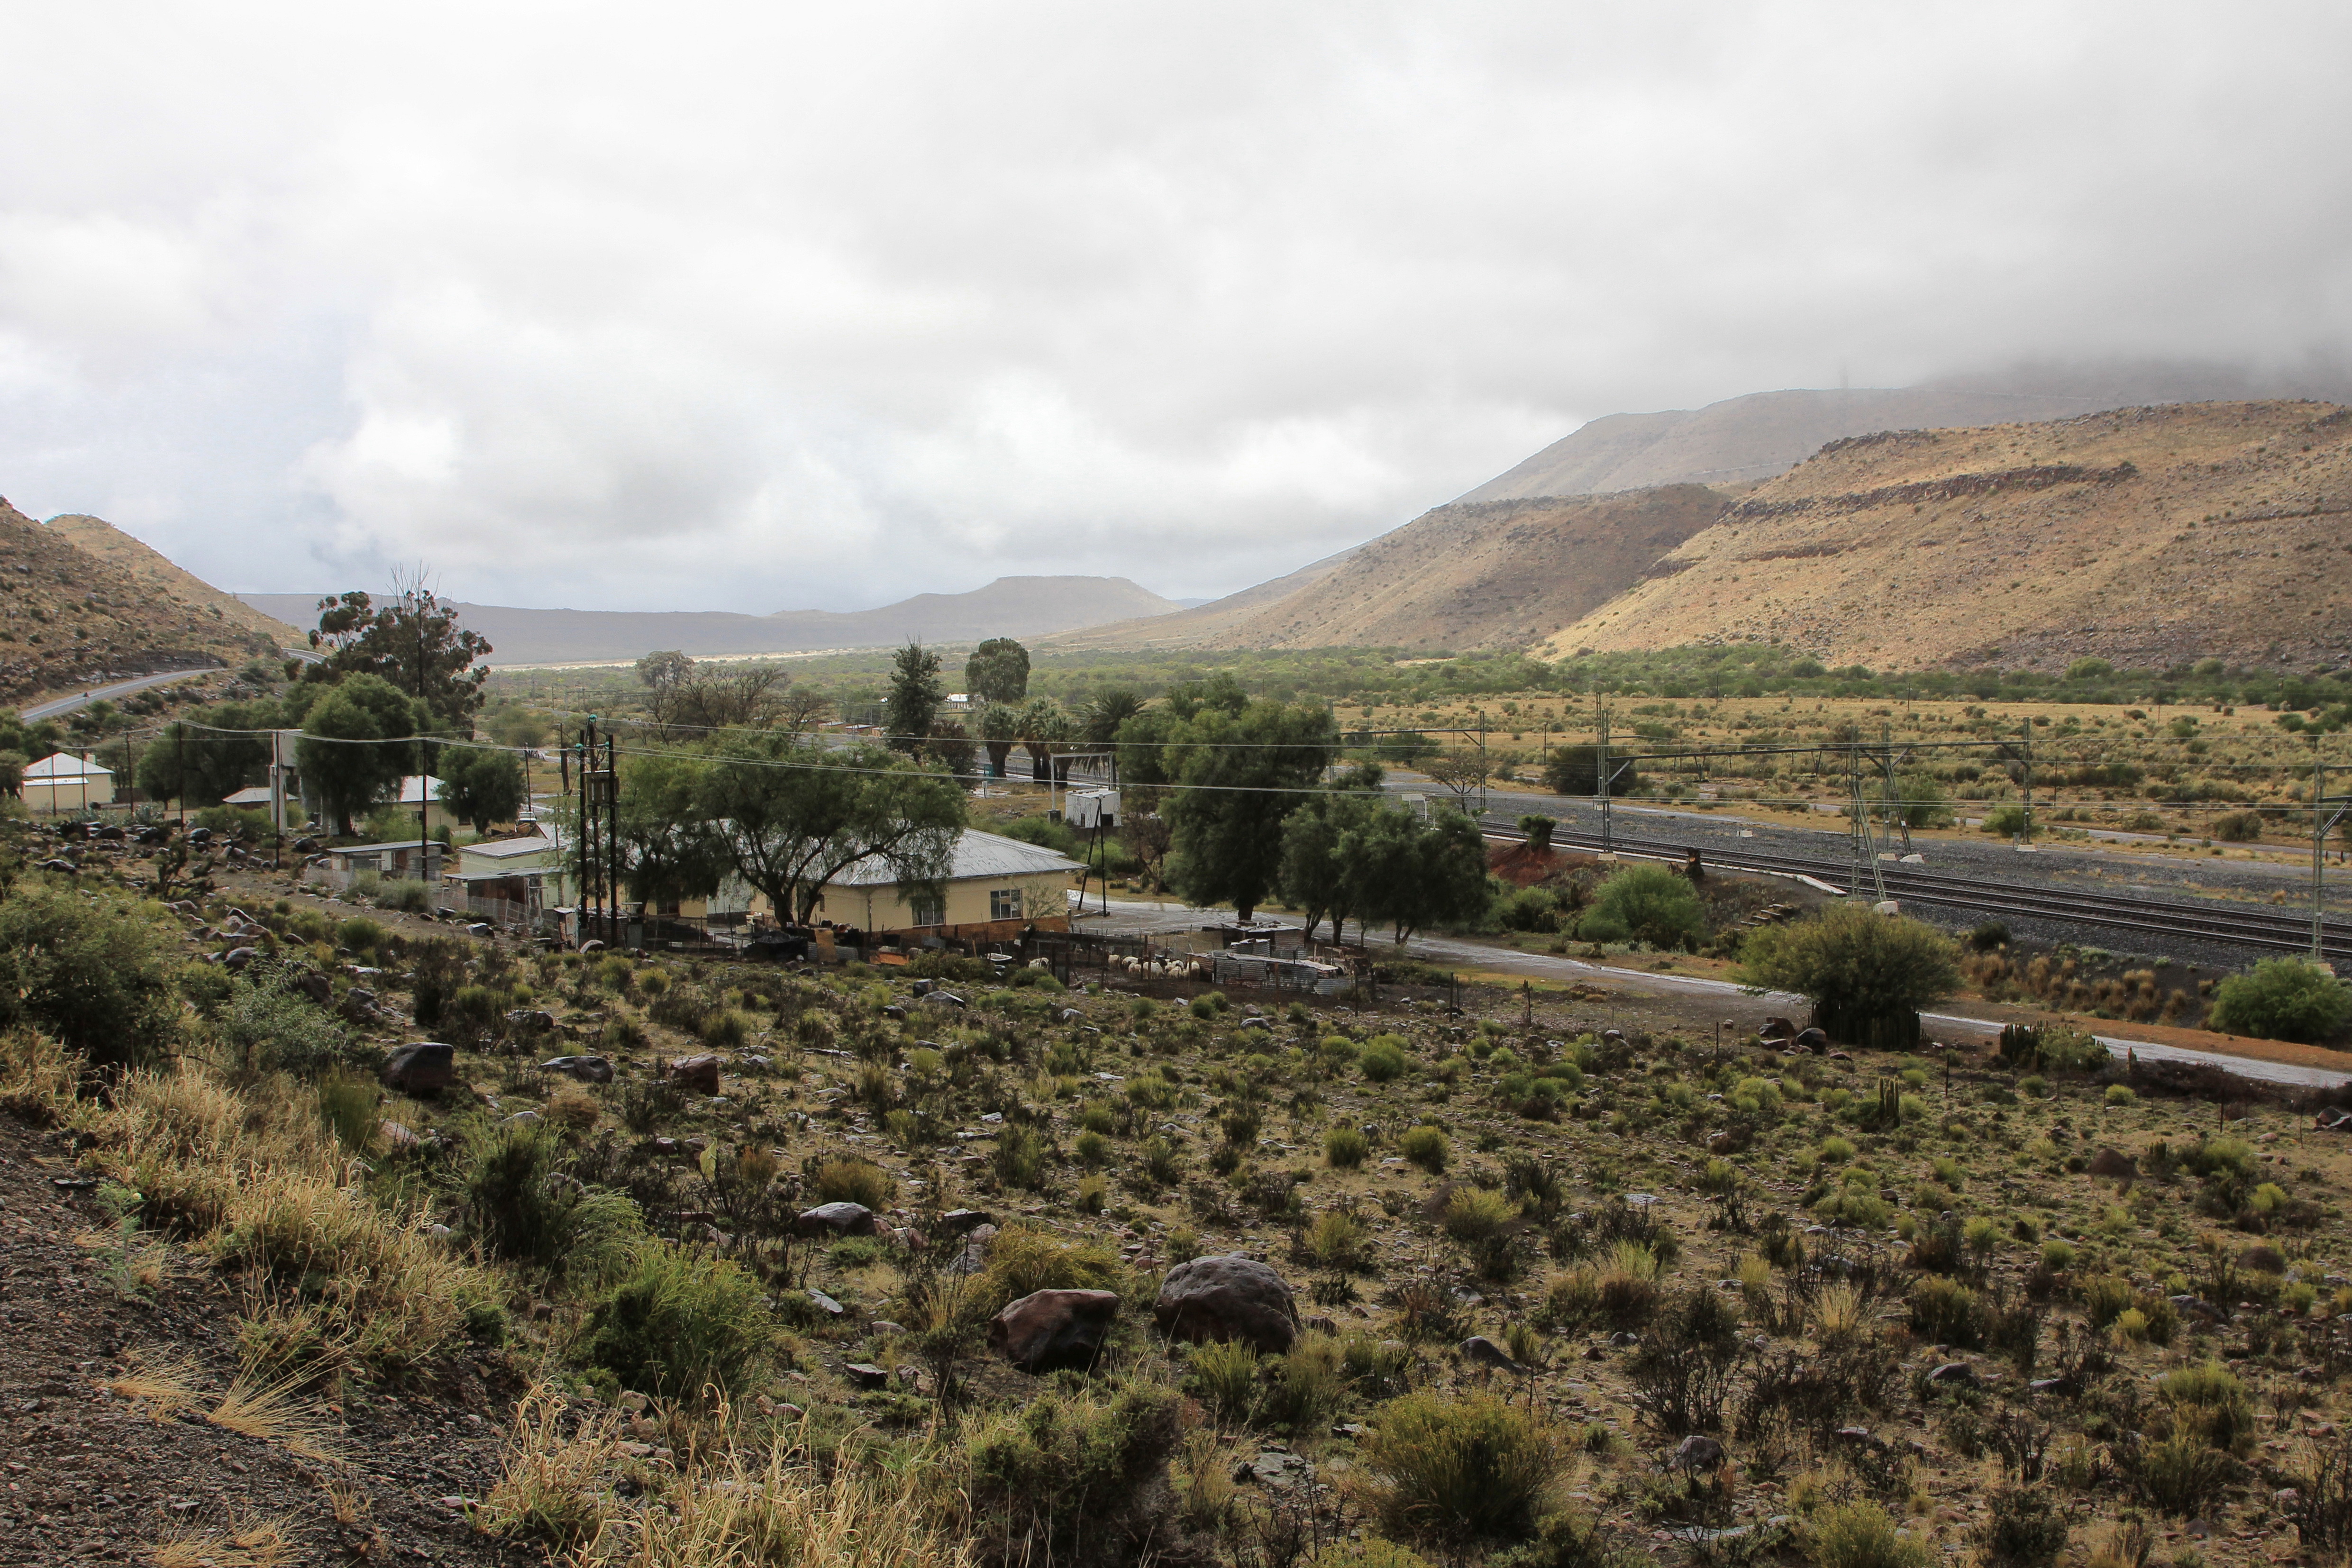 In the late Victorian era, Nelspoort Station used to buzz with visitors arriving to take healing from the fresh Karoo air. Image: Chris Marais